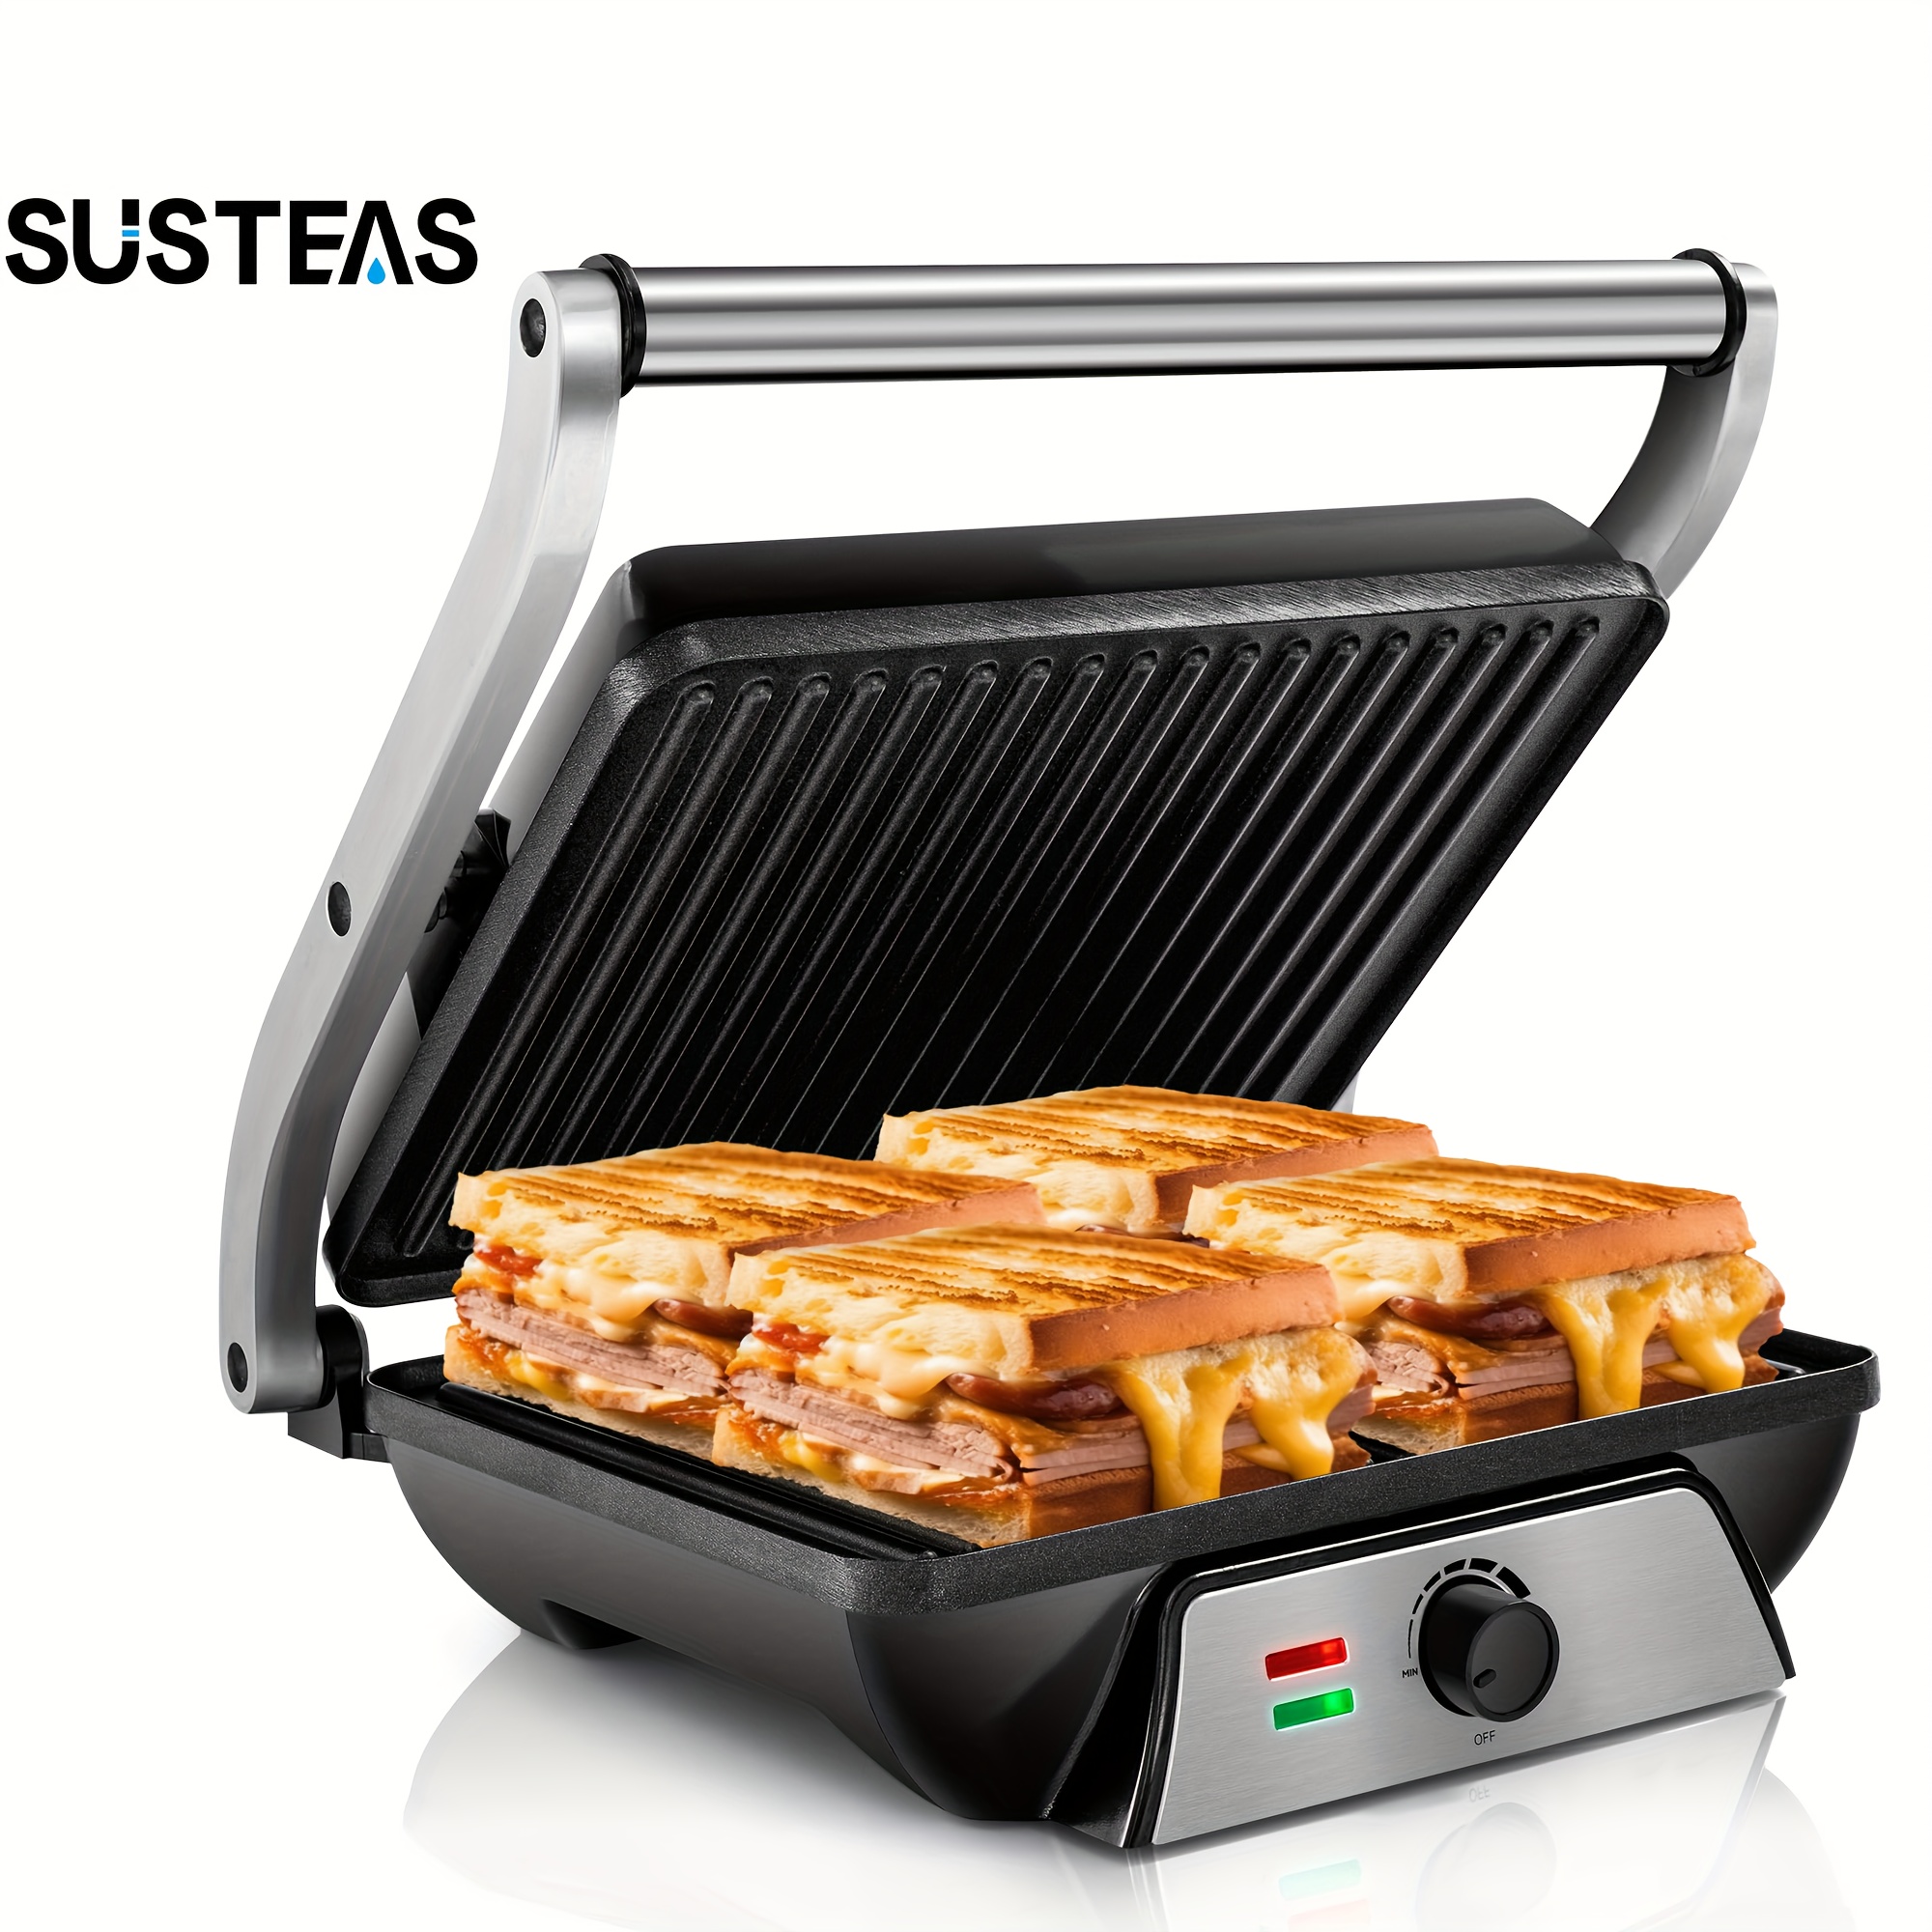 susteas 3 in 1 electric indoor grill panini press with non stick cooking plates opens 180 degree gourmet sandwich maker floating hinge fits all foods panini press grill with grease tray